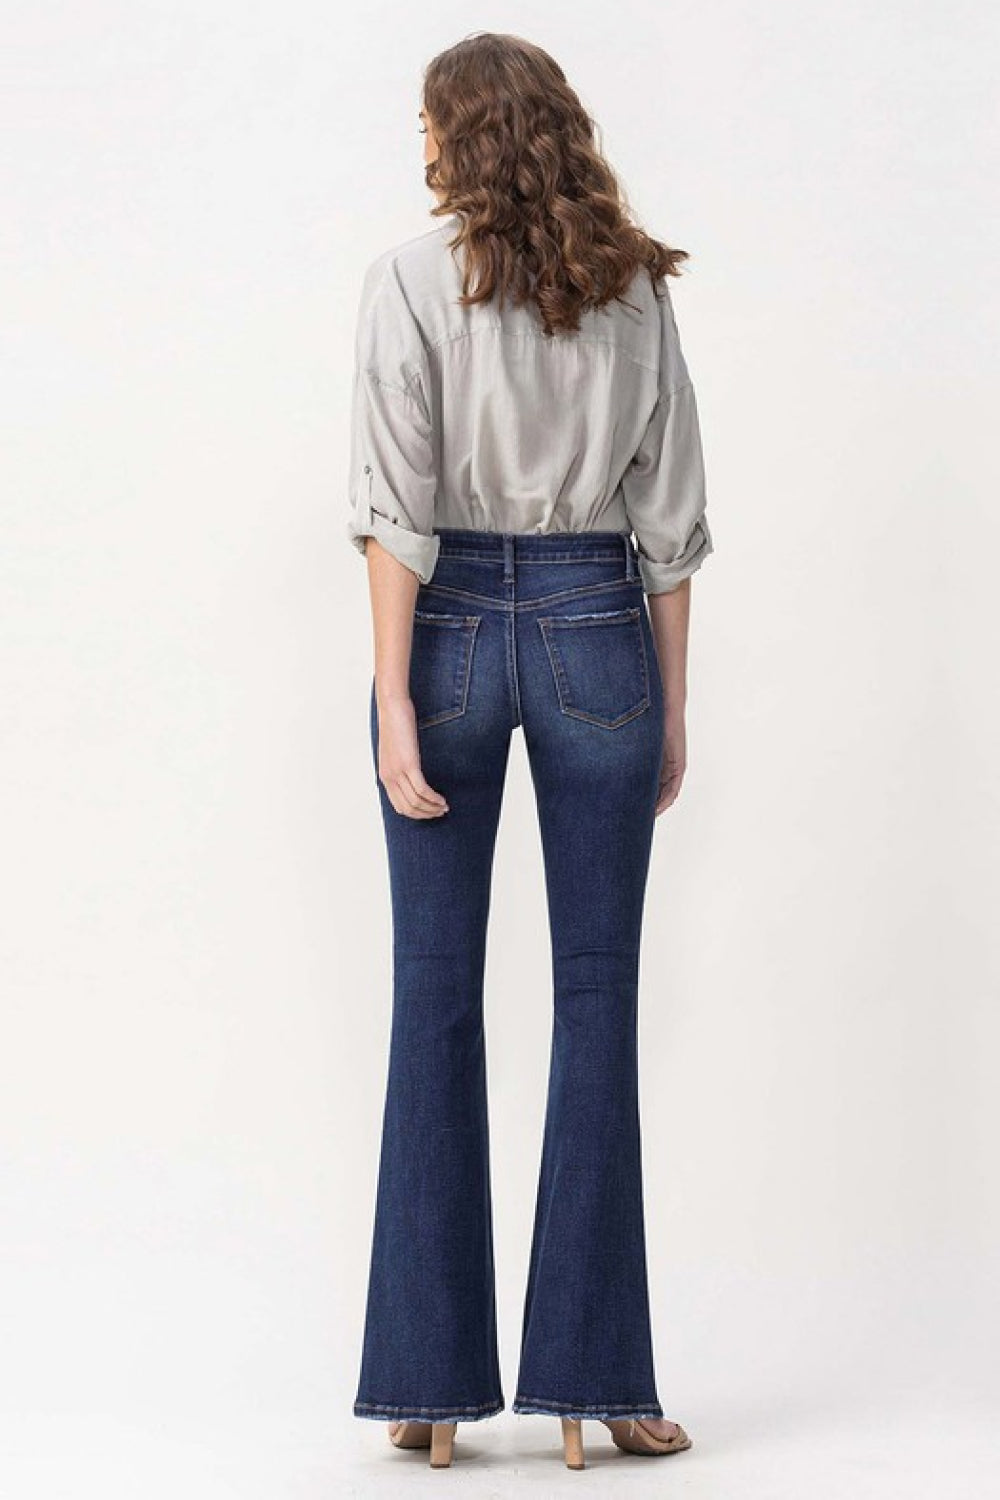 Lovervet Full Size Joanna Midrise Flare Jeans - Cheeky Chic Boutique